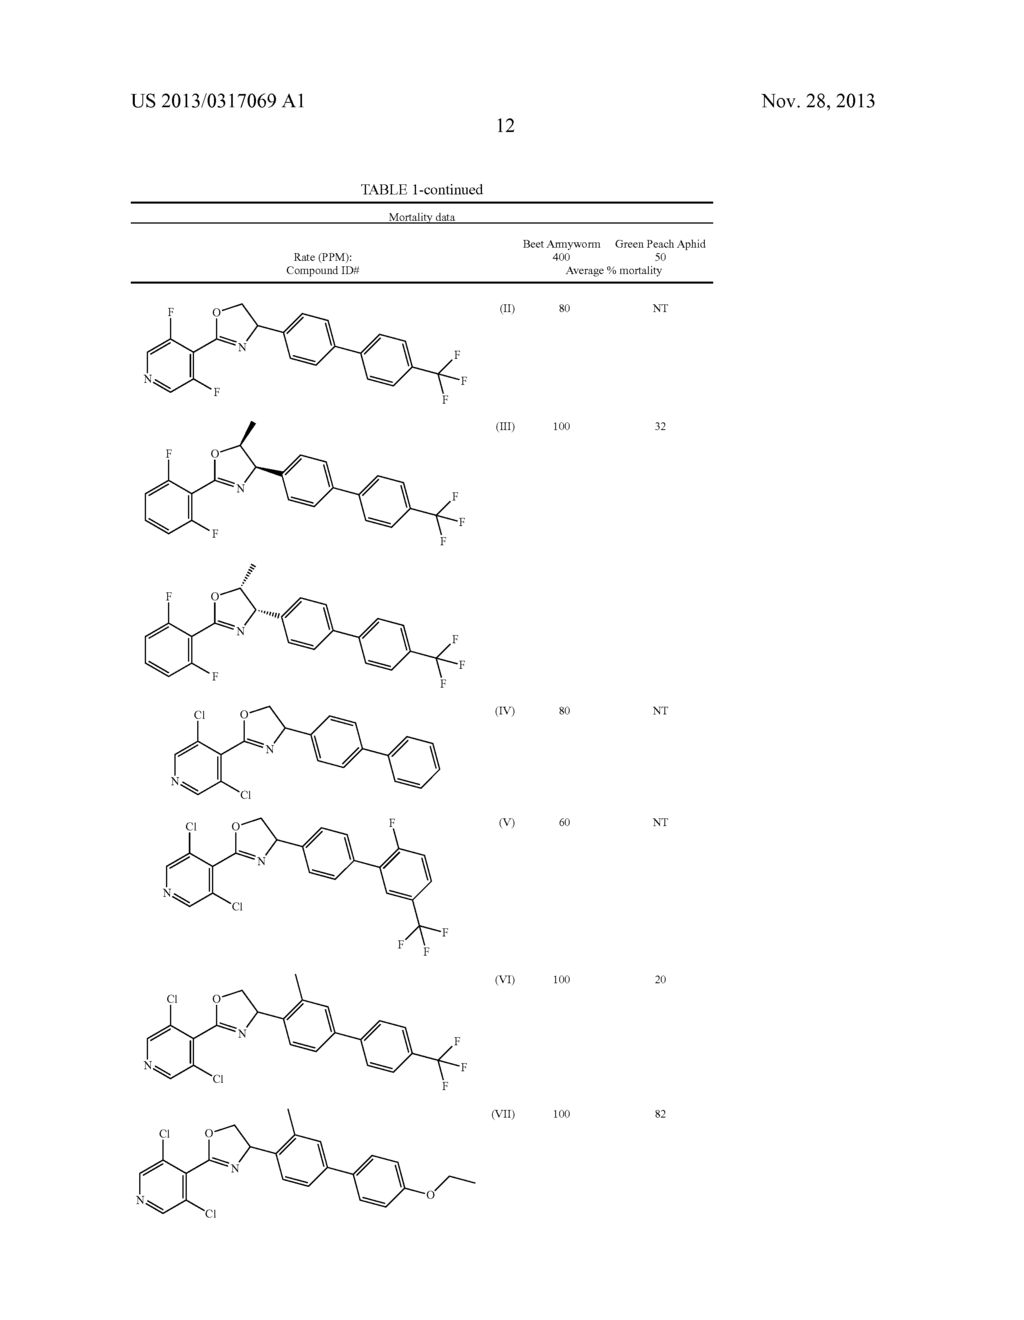 2,4-(SUBSTITUTED AROMATIC)-1,3-OXAZOLINE COMPOUNDS AS A SEED TREATMENT TO     CONTROL PESTS - diagram, schematic, and image 13